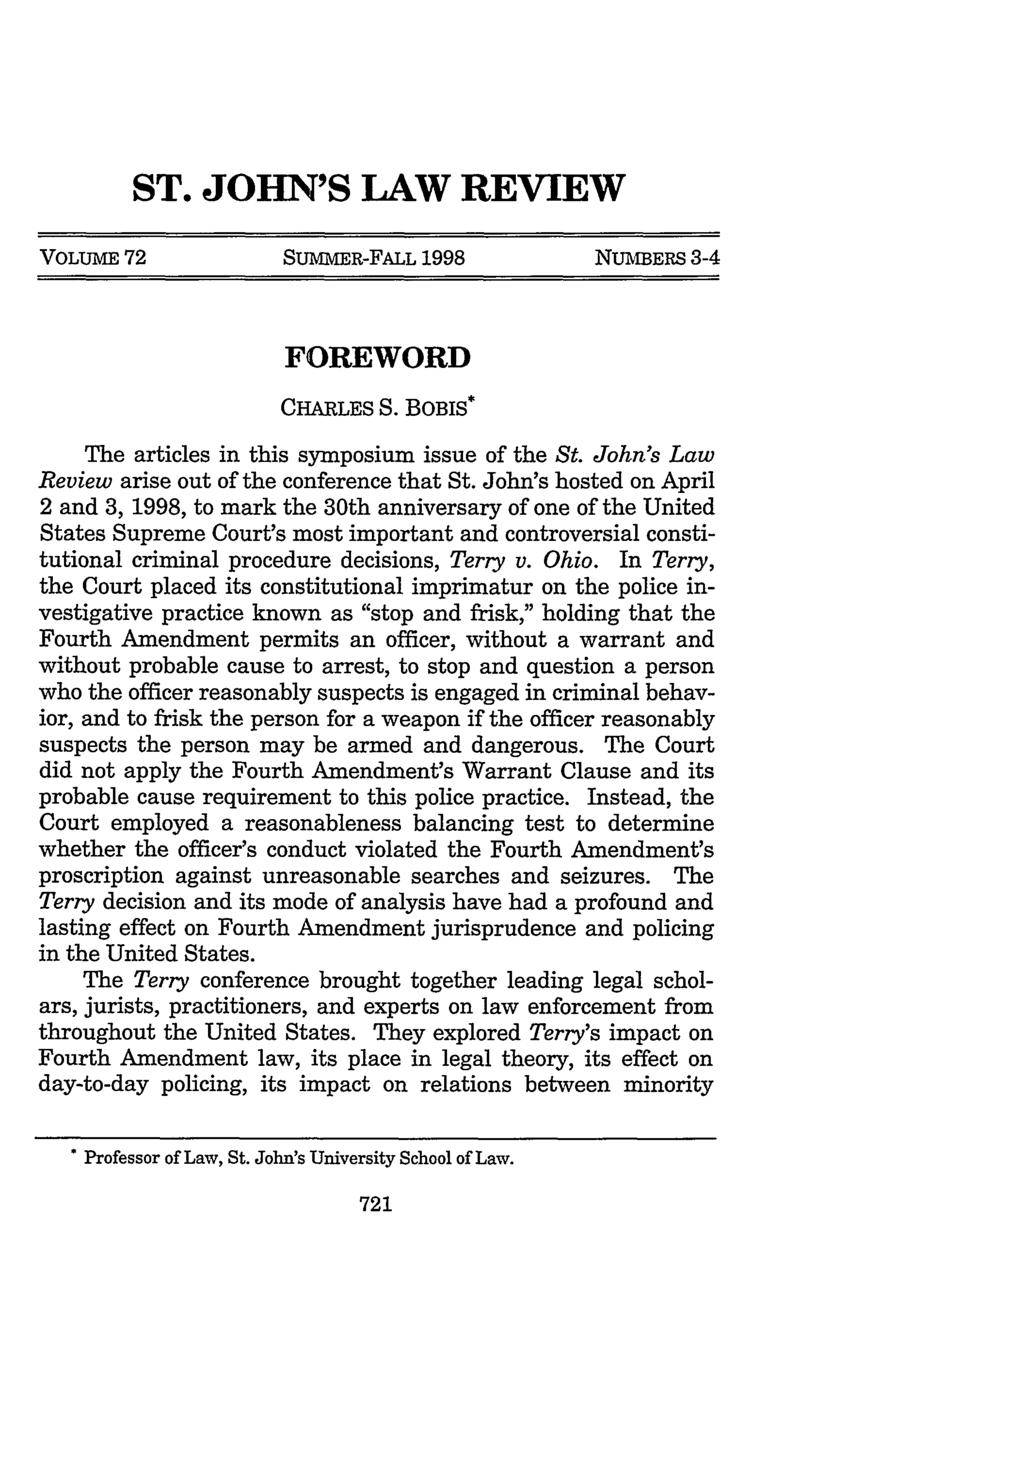 VOLUME 72 SUMmER-FALL 1998 NUMBERS 3-4 FOREWORD CHARLES S. BOBIS* The articles in this symposium issue of the St. John's Law Review arise out of the conference that St.